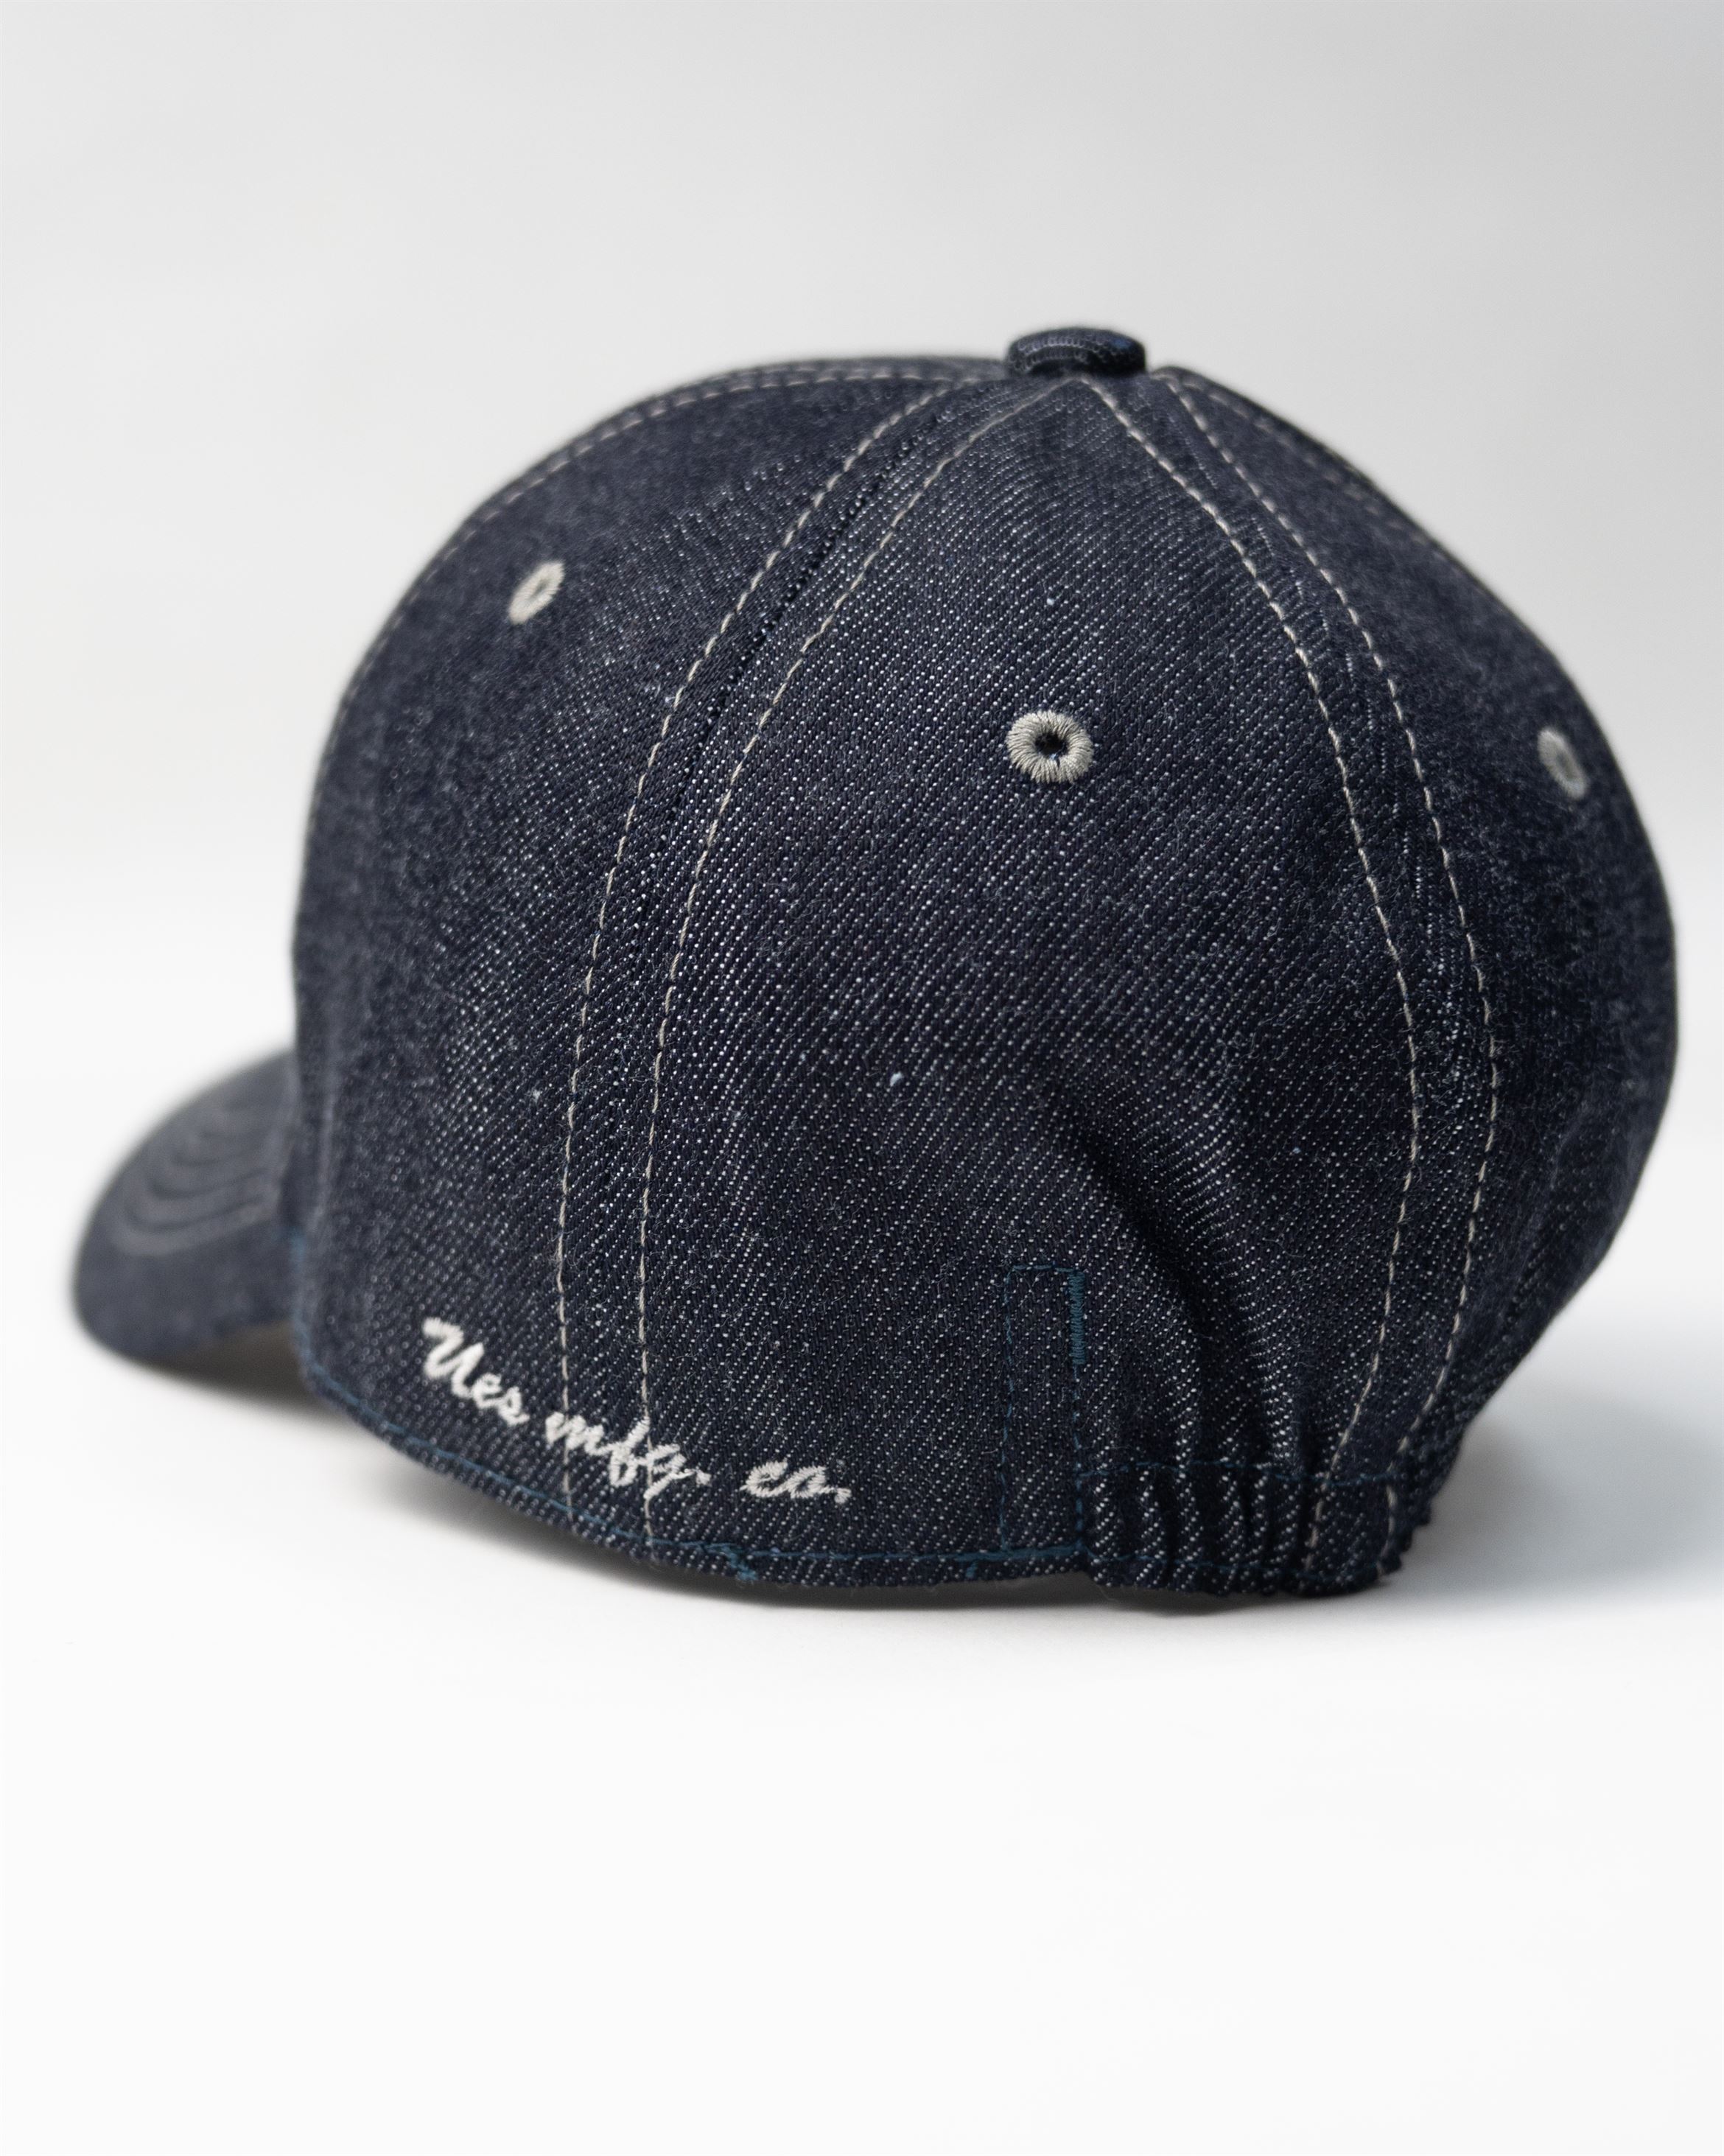 2023 Limited Edition Denim Cap 82DC-O | Happy Day Red